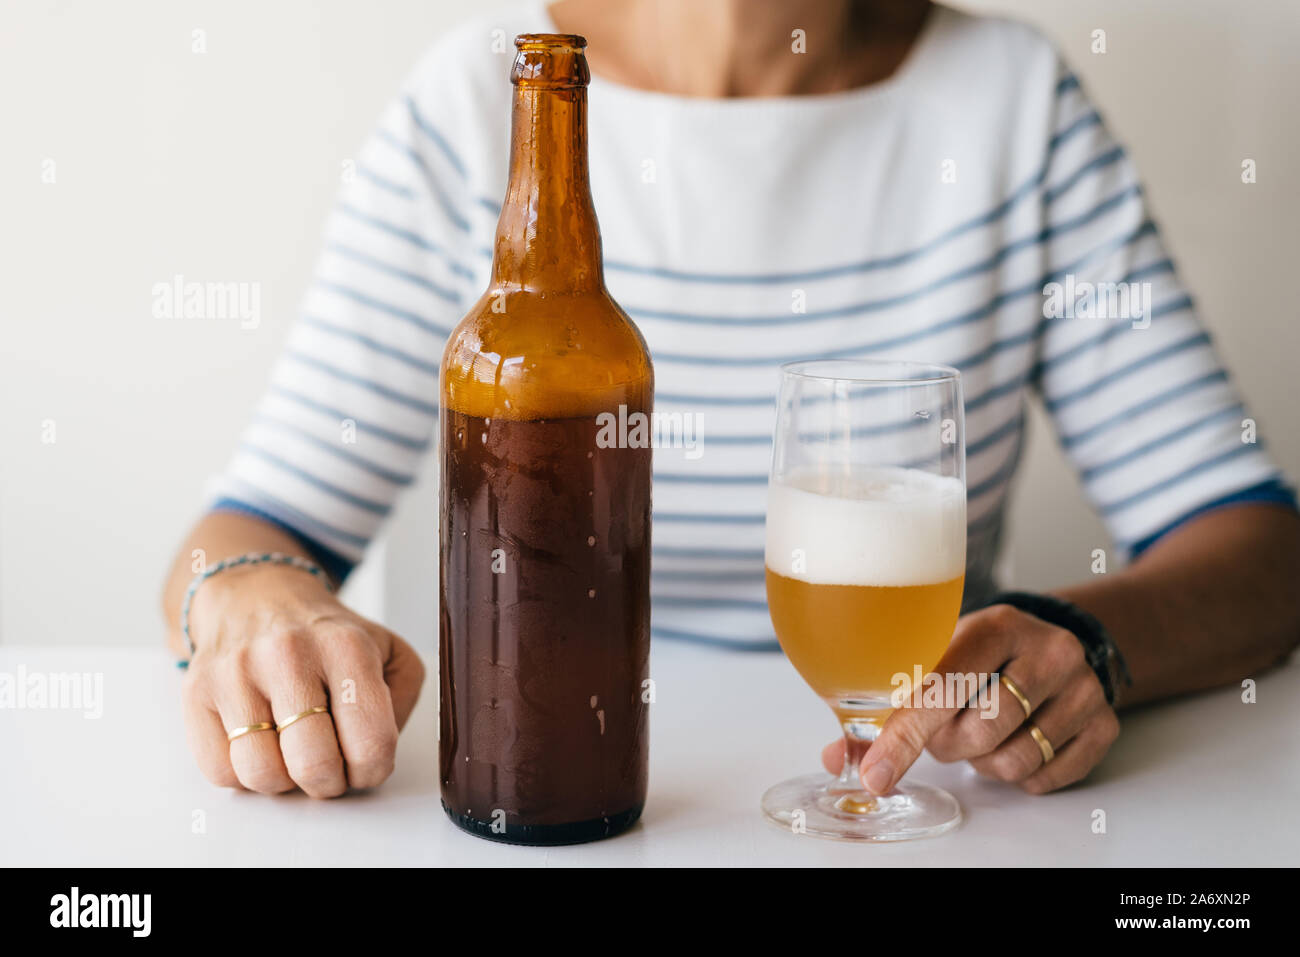 Woman sitting on a table with a glass of beer and a bottle. Stock Photo